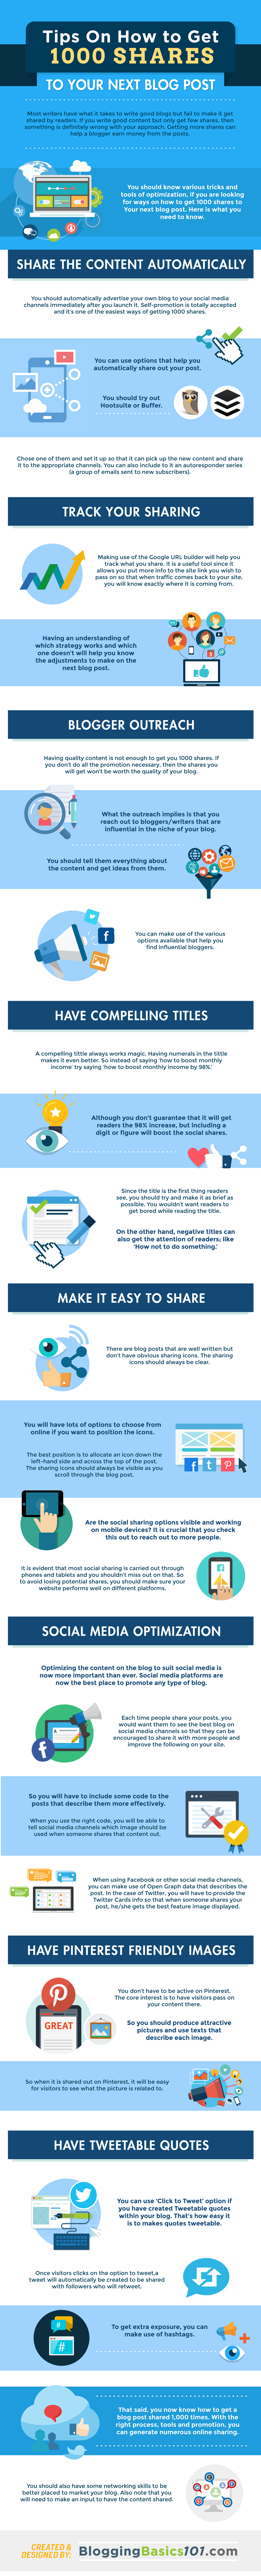 Tips-On-How-to-Get-1000-Shares-to-Your-Next-Blog-Post-HD.png